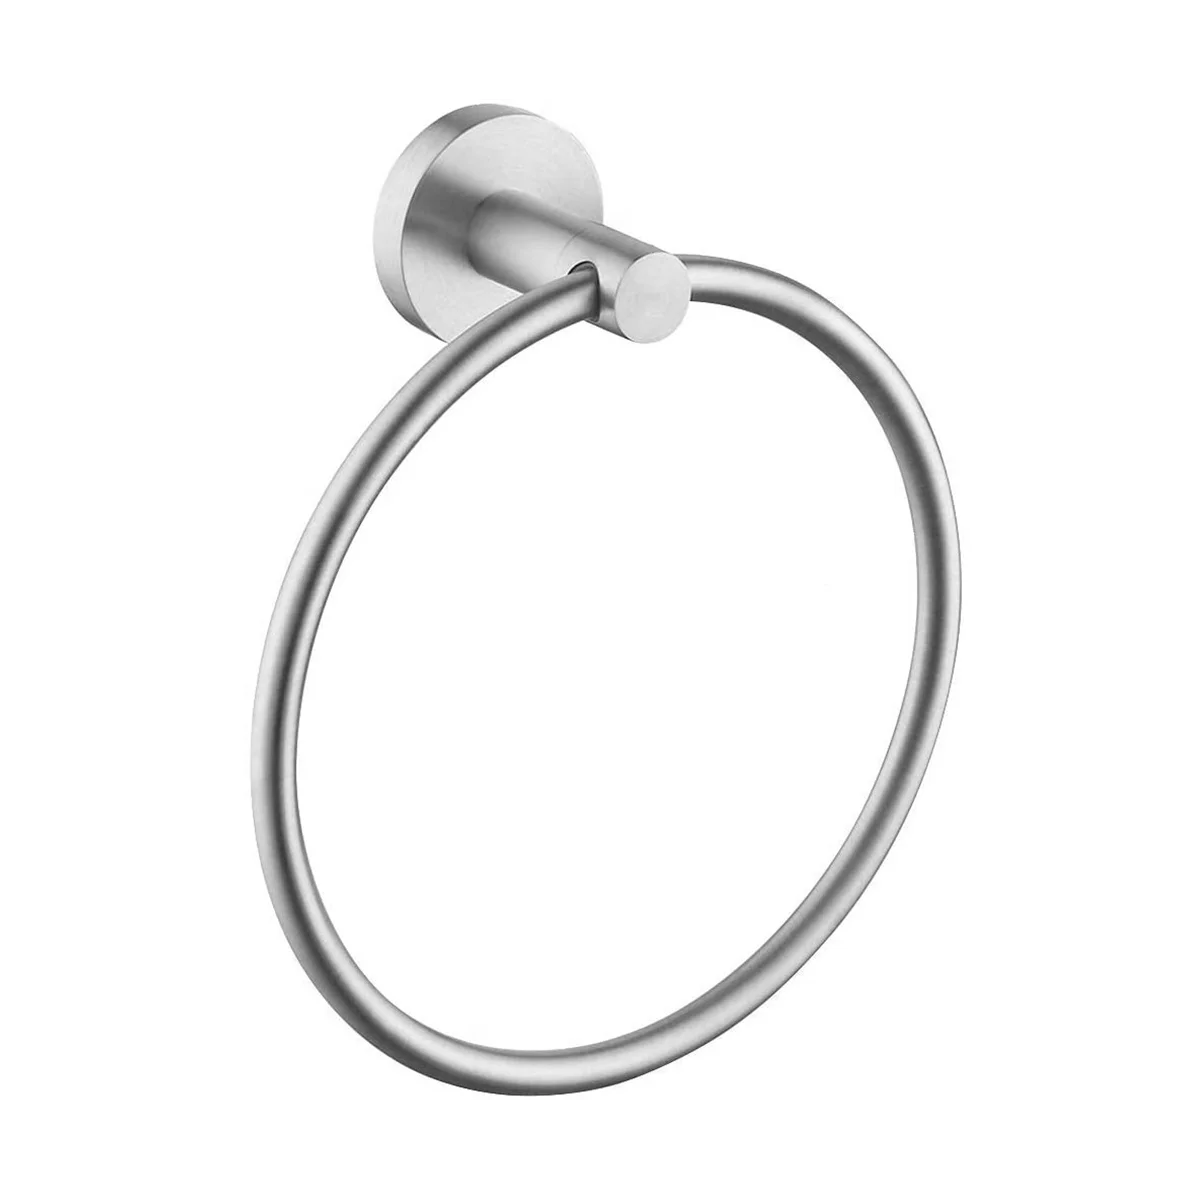 

Towel Ring for Bathroom, Hand Towel Holder Round Towel Hanger Wall Mount 304 Stainless Steel Brushed Finish(Silver)